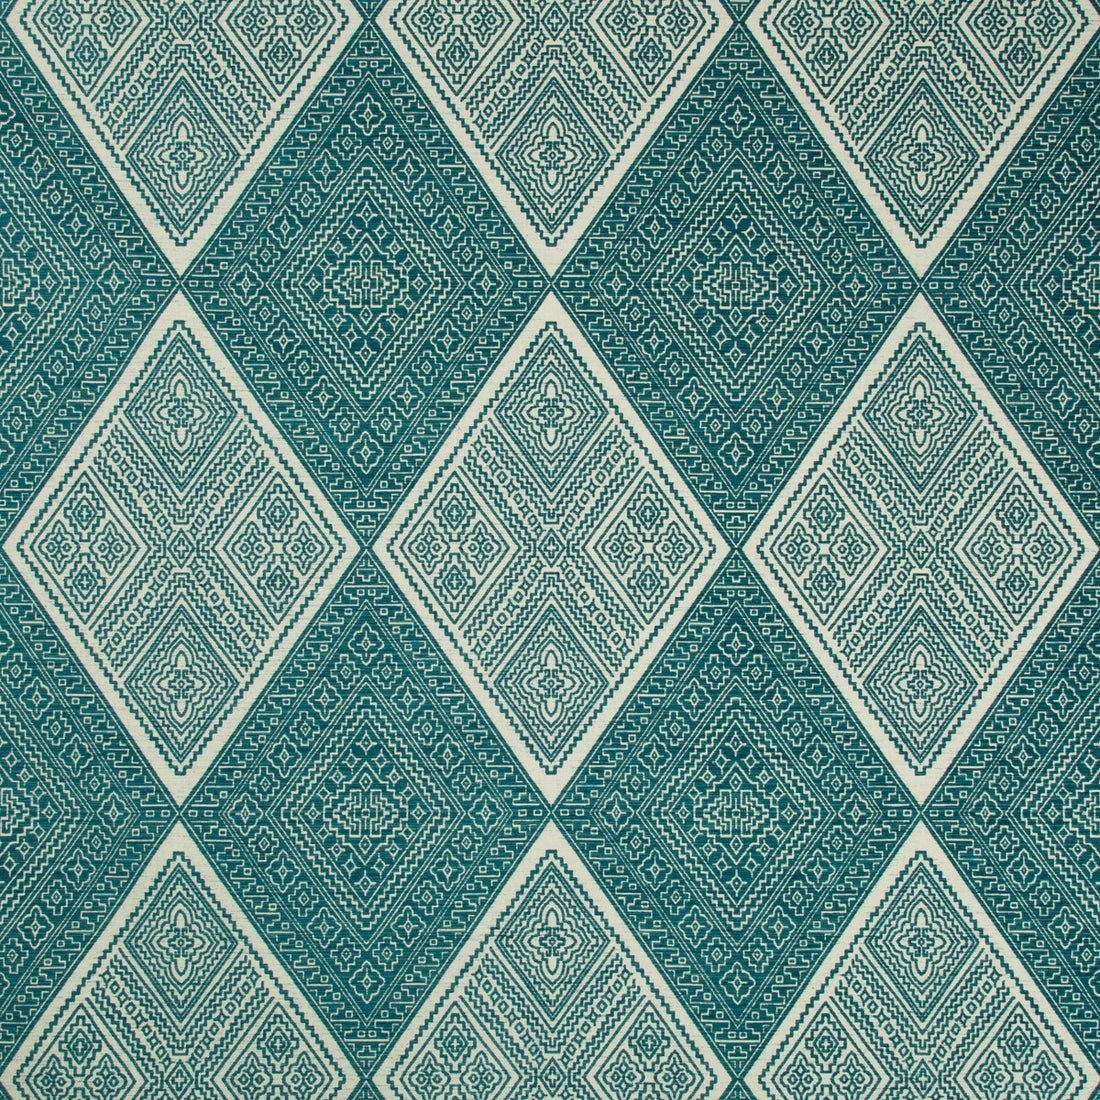 Kravet Design fabric in 35000-35 color - pattern 35000.35.0 - by Kravet Design in the Performance Crypton Home collection